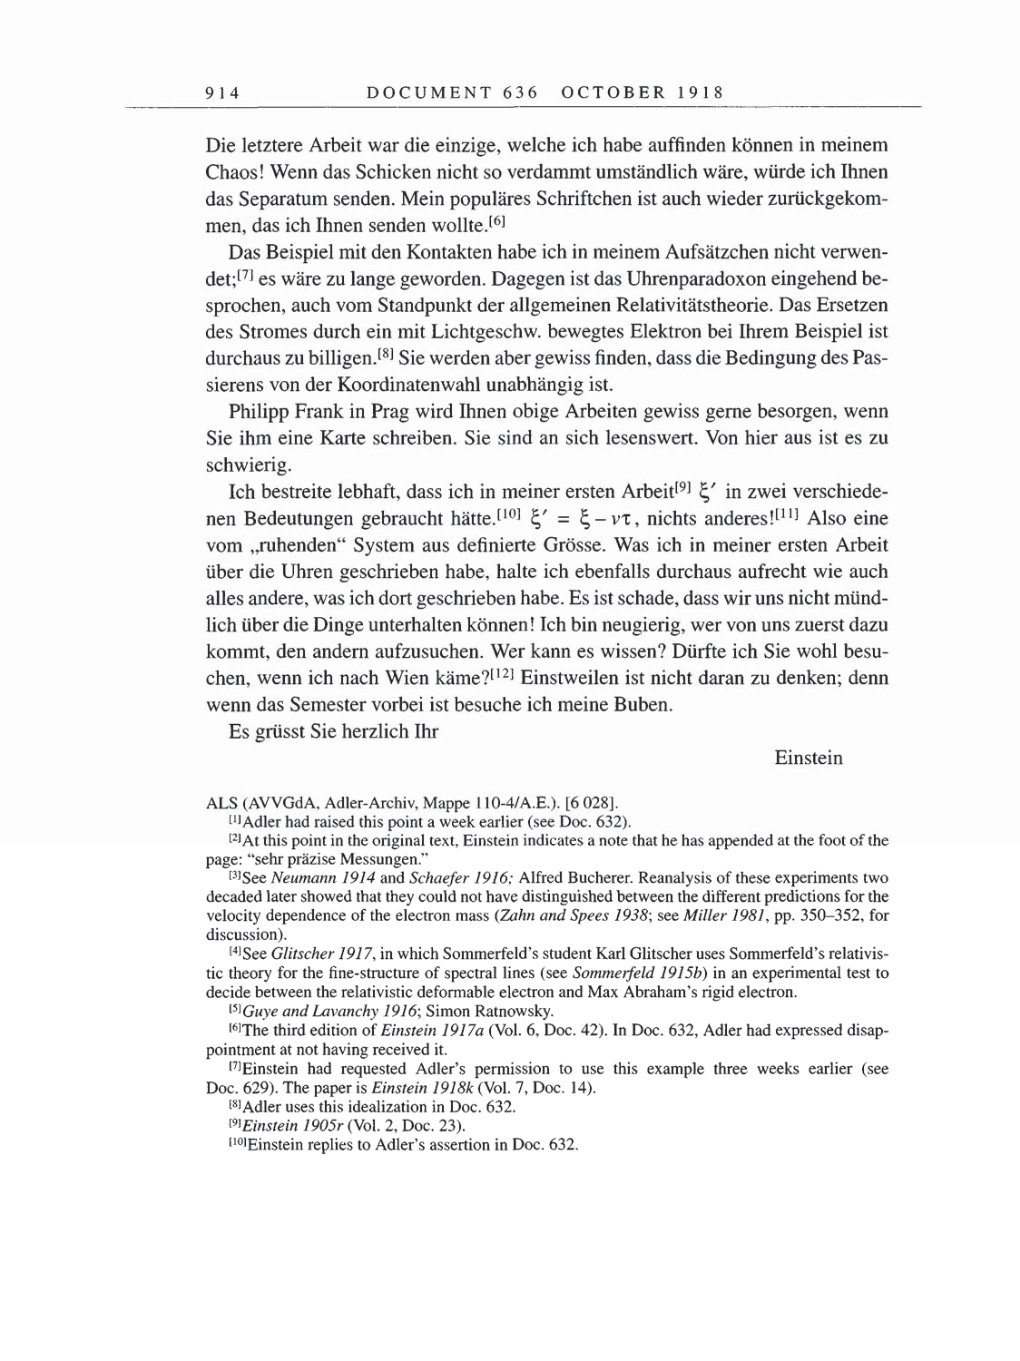 Volume 8, Part B: The Berlin Years: Correspondence 1918 page 914